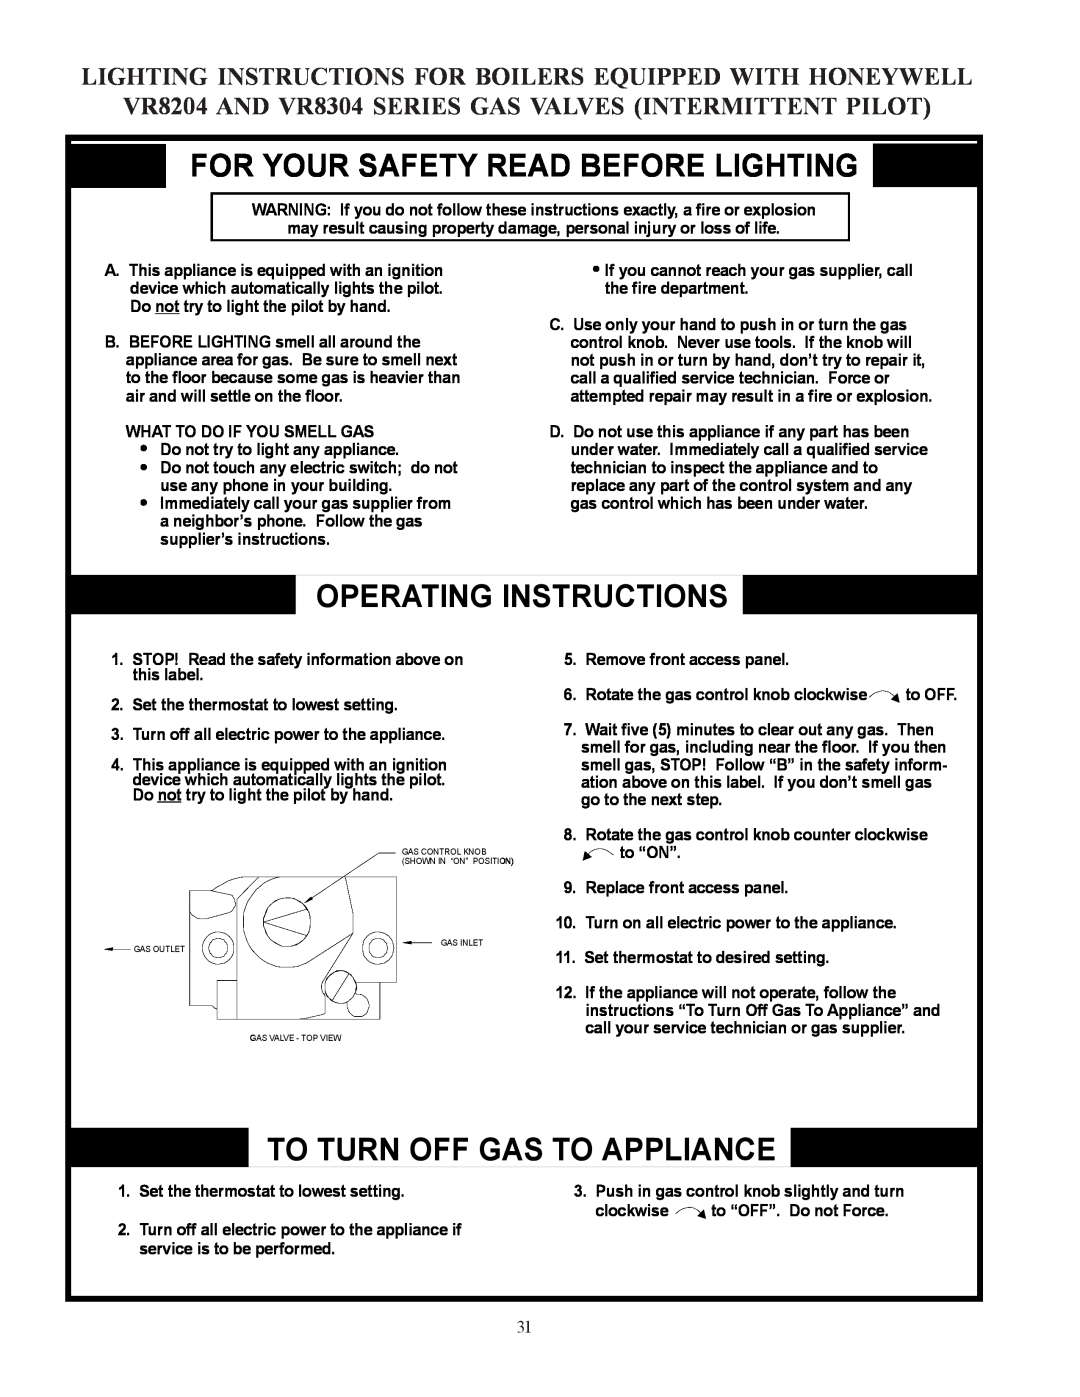 Crown Boiler CWI138, CWI172 For Your Safety Read Before Lighting, Operating Instructions, To Turn Off Gas To Appliance 